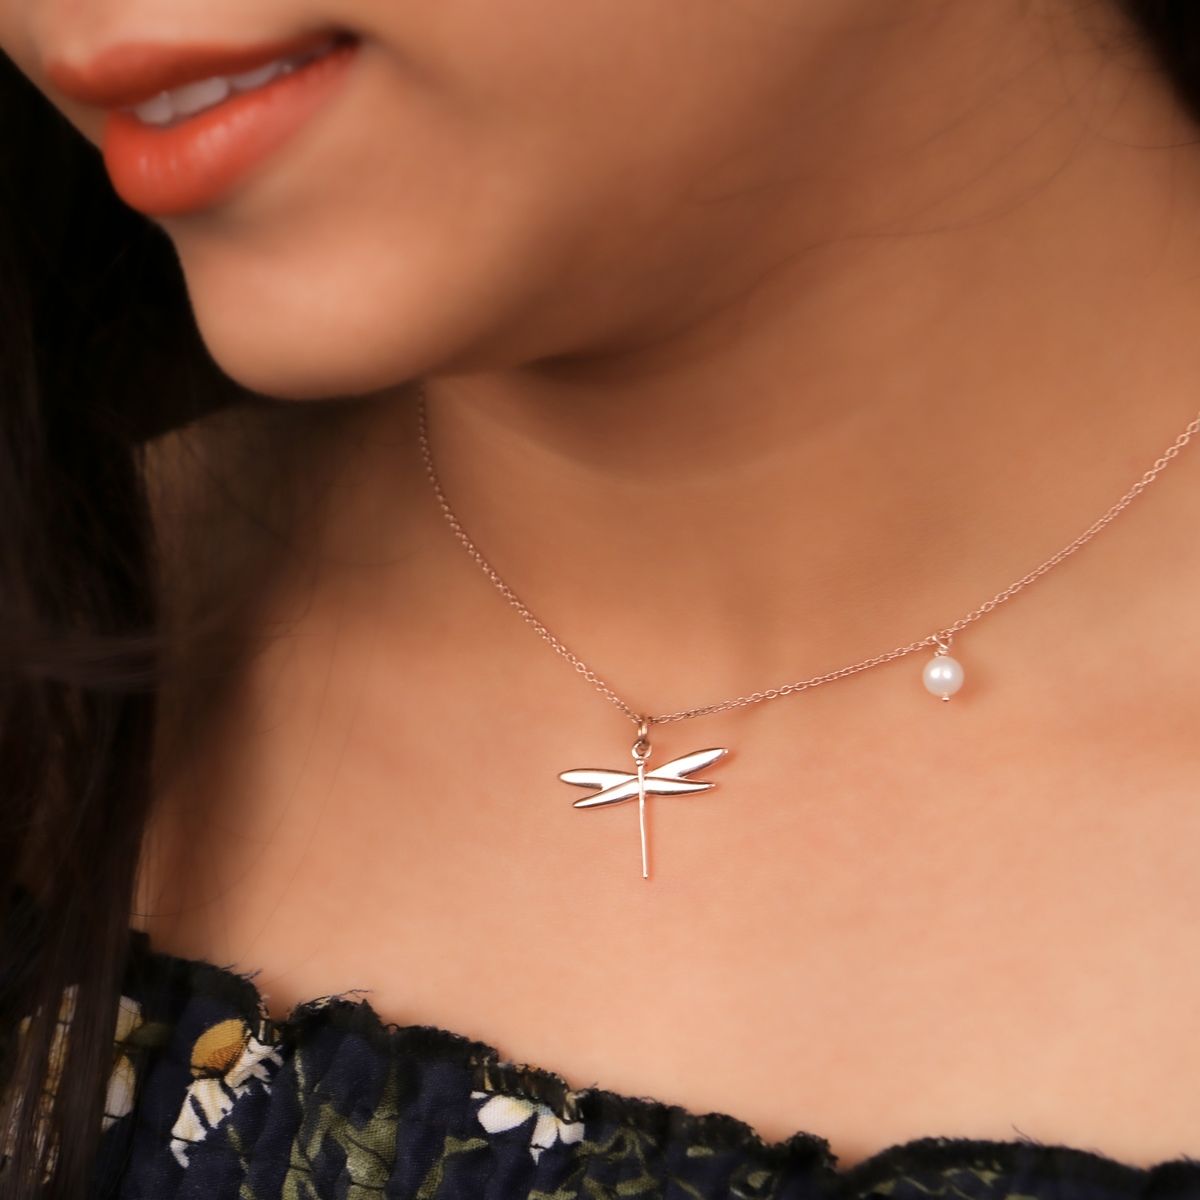 Buy Ornate Jewels 925 Sterling Silver Solid Metal Dragonfly Pendant with  18-inch Chain for Women and Girls Anniversary Birthday Gifts at Amazon.in